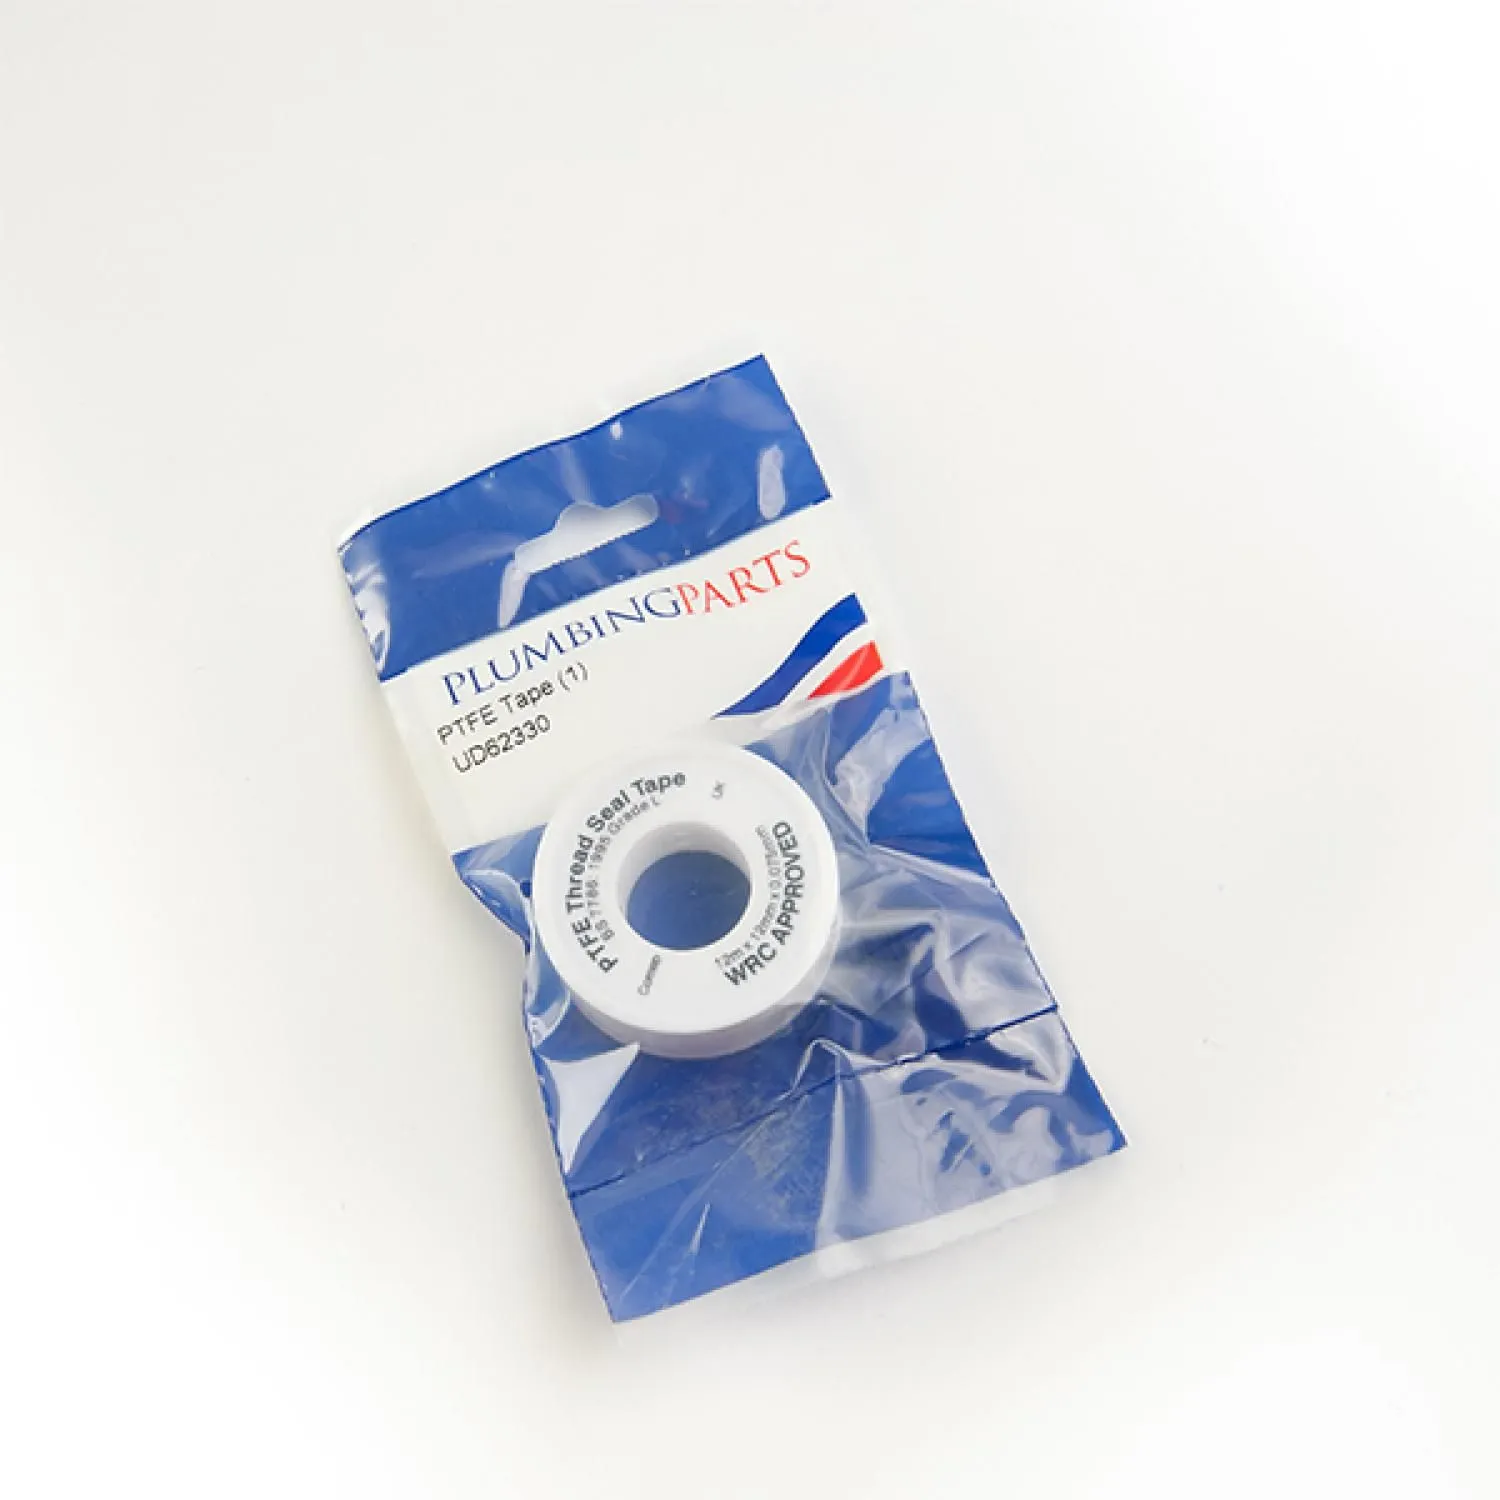 PTFE Tape Water BS / WRAS approved 12mm x 12mtr  Loose